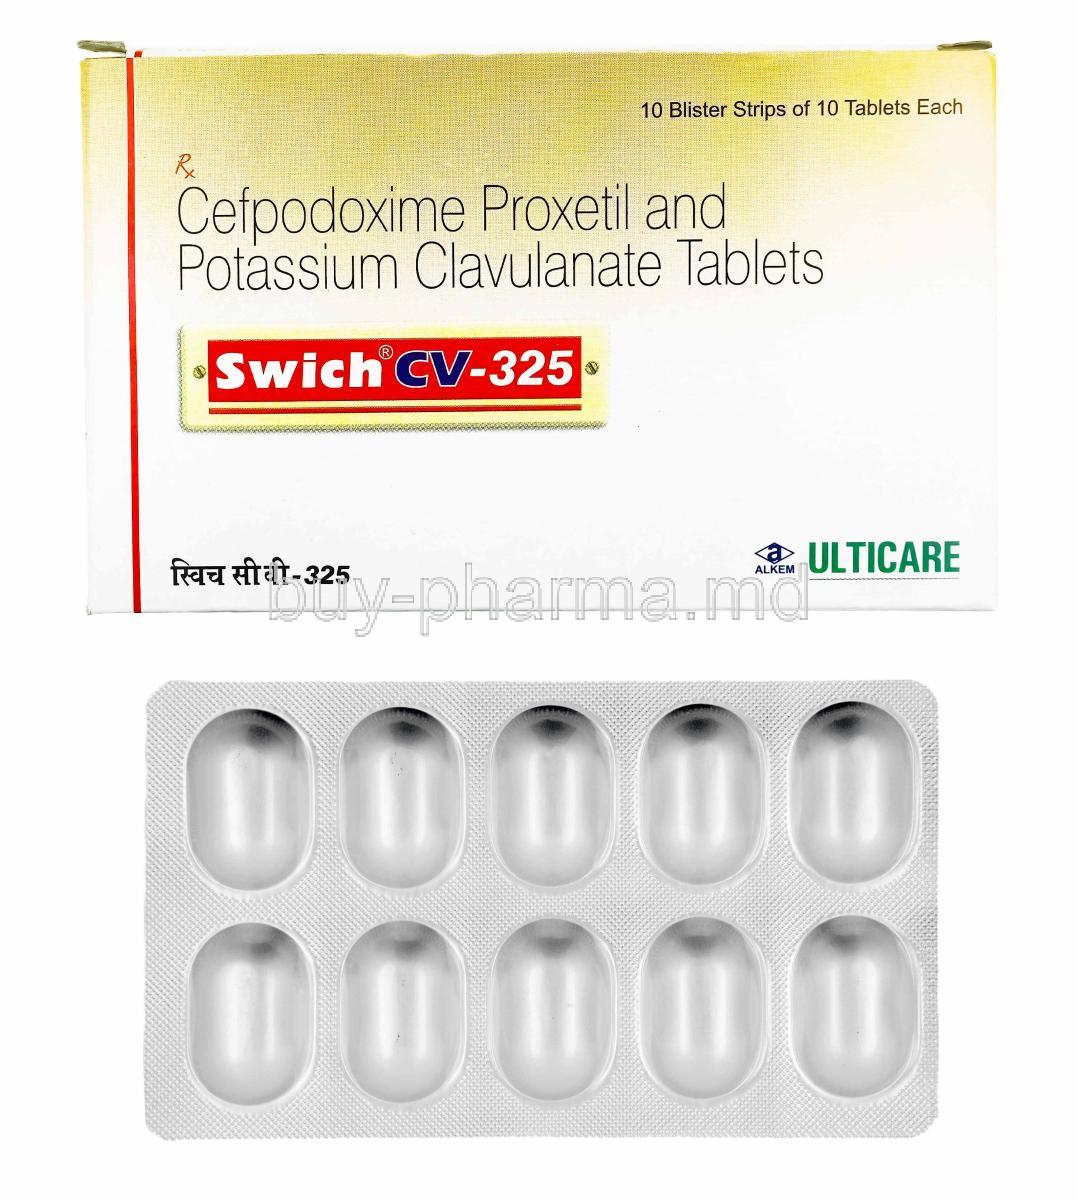 Swich CV, Cefpodoxime and Clavulanic Acid box and tablets